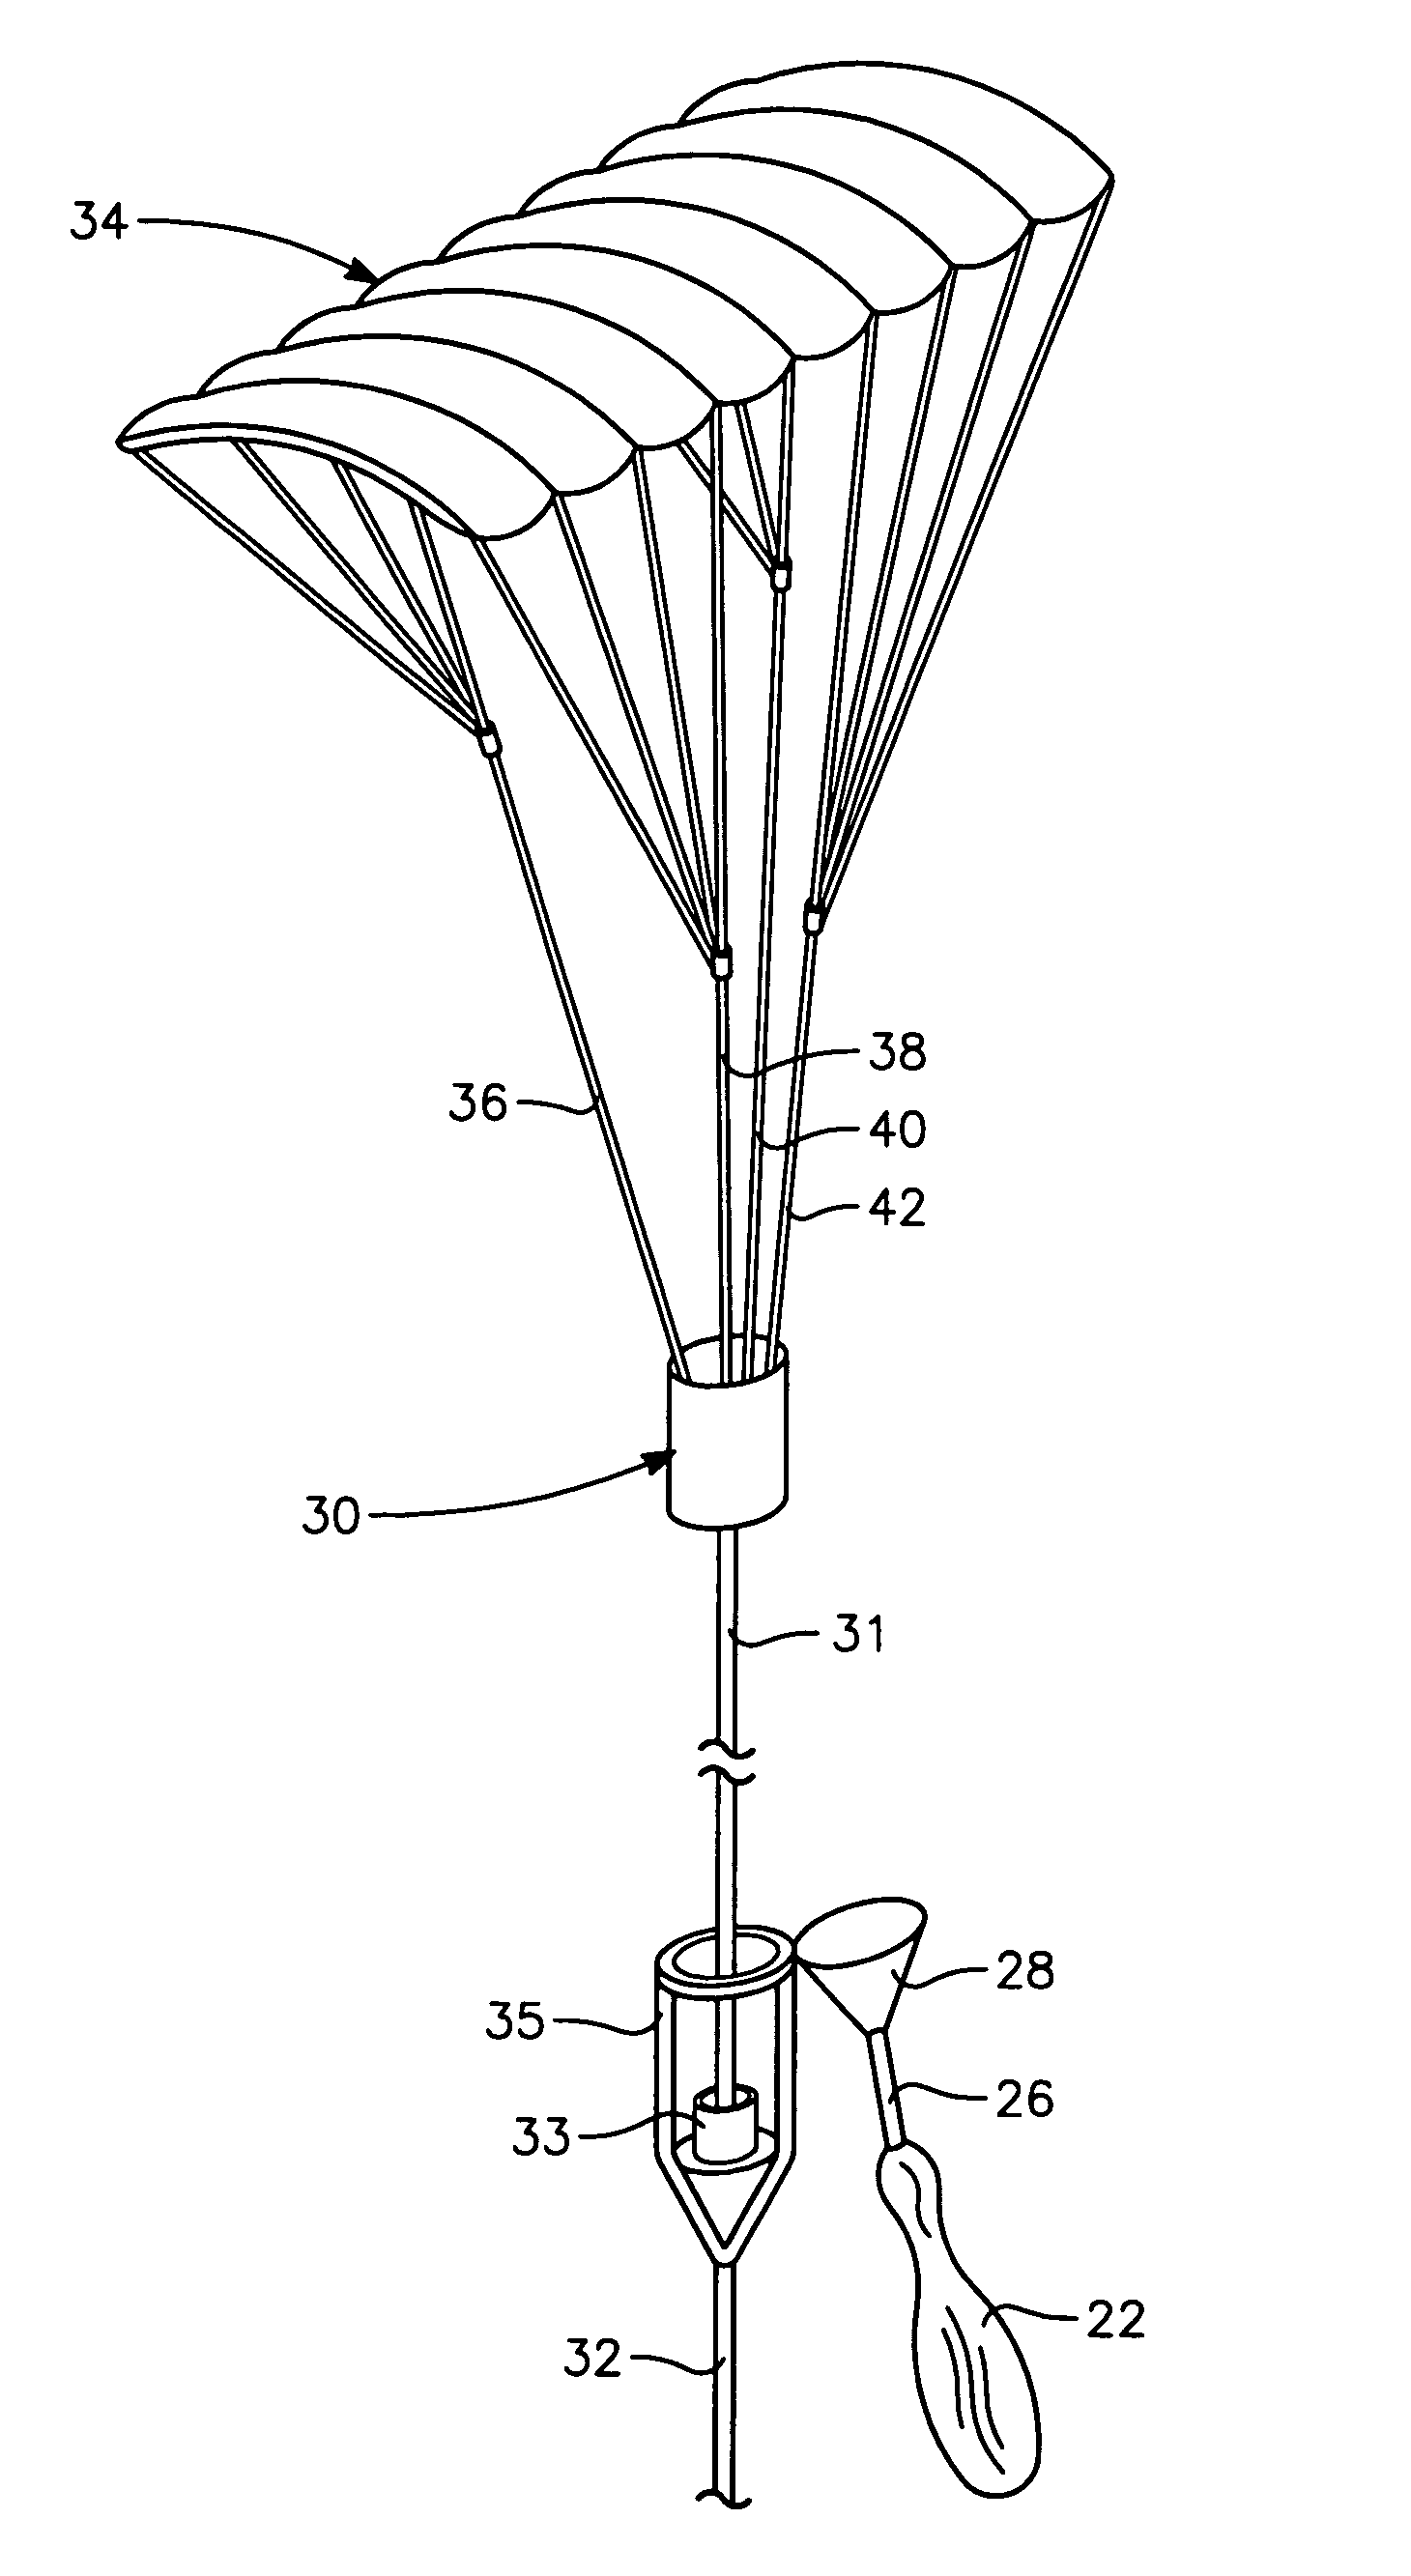 Autonomously controlled GPS-guided parafoil recovery apparatus